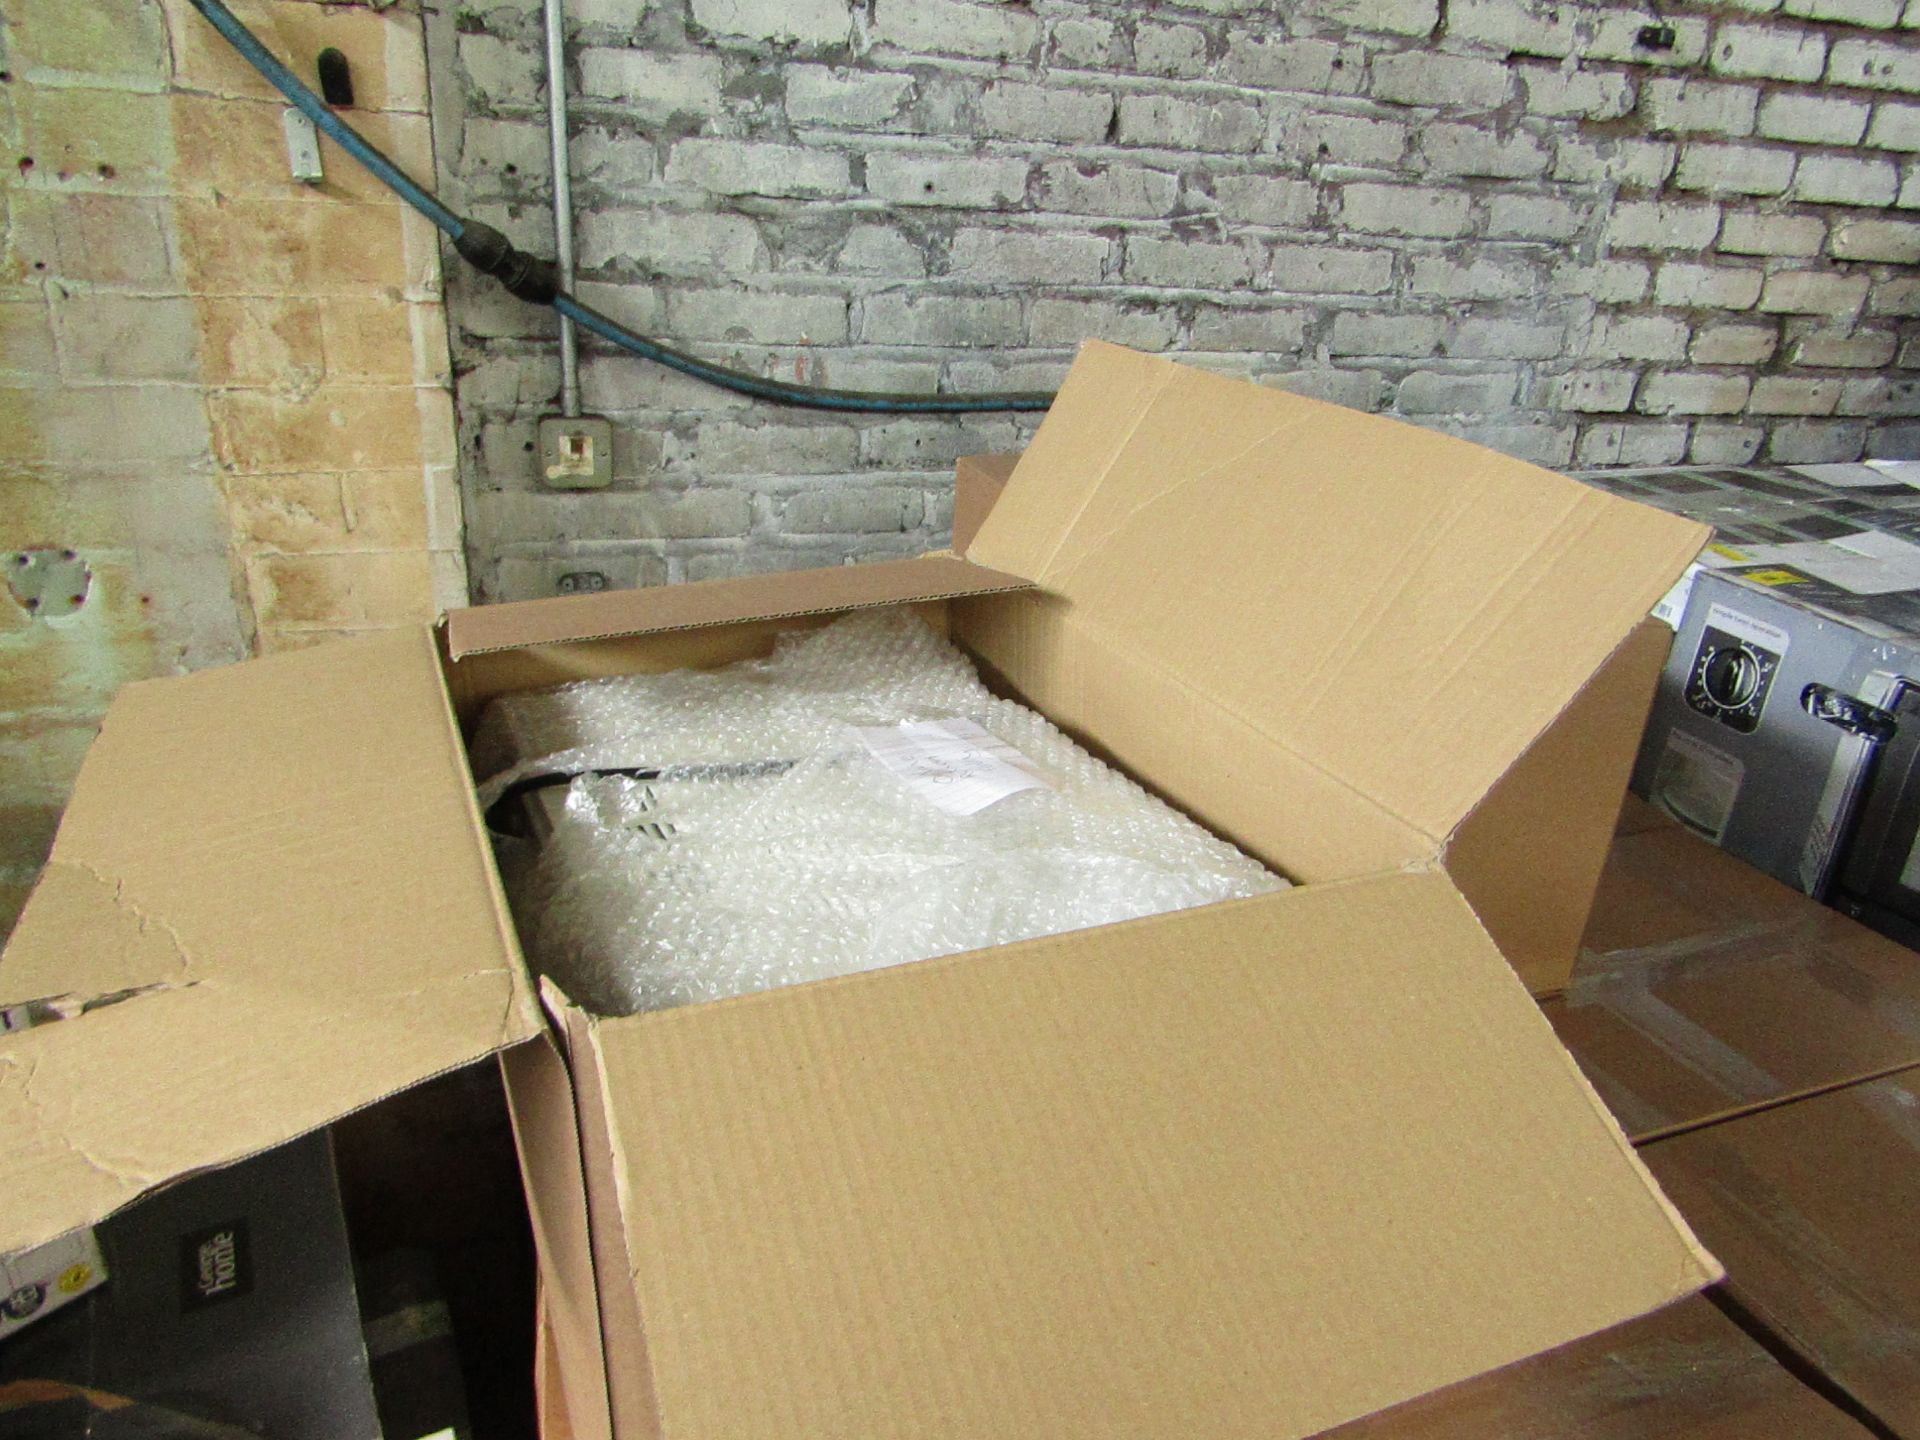 5x Microwaves in Non Original Boxes Picked at Random - Unchecked & Boxed - Be aware we do not know